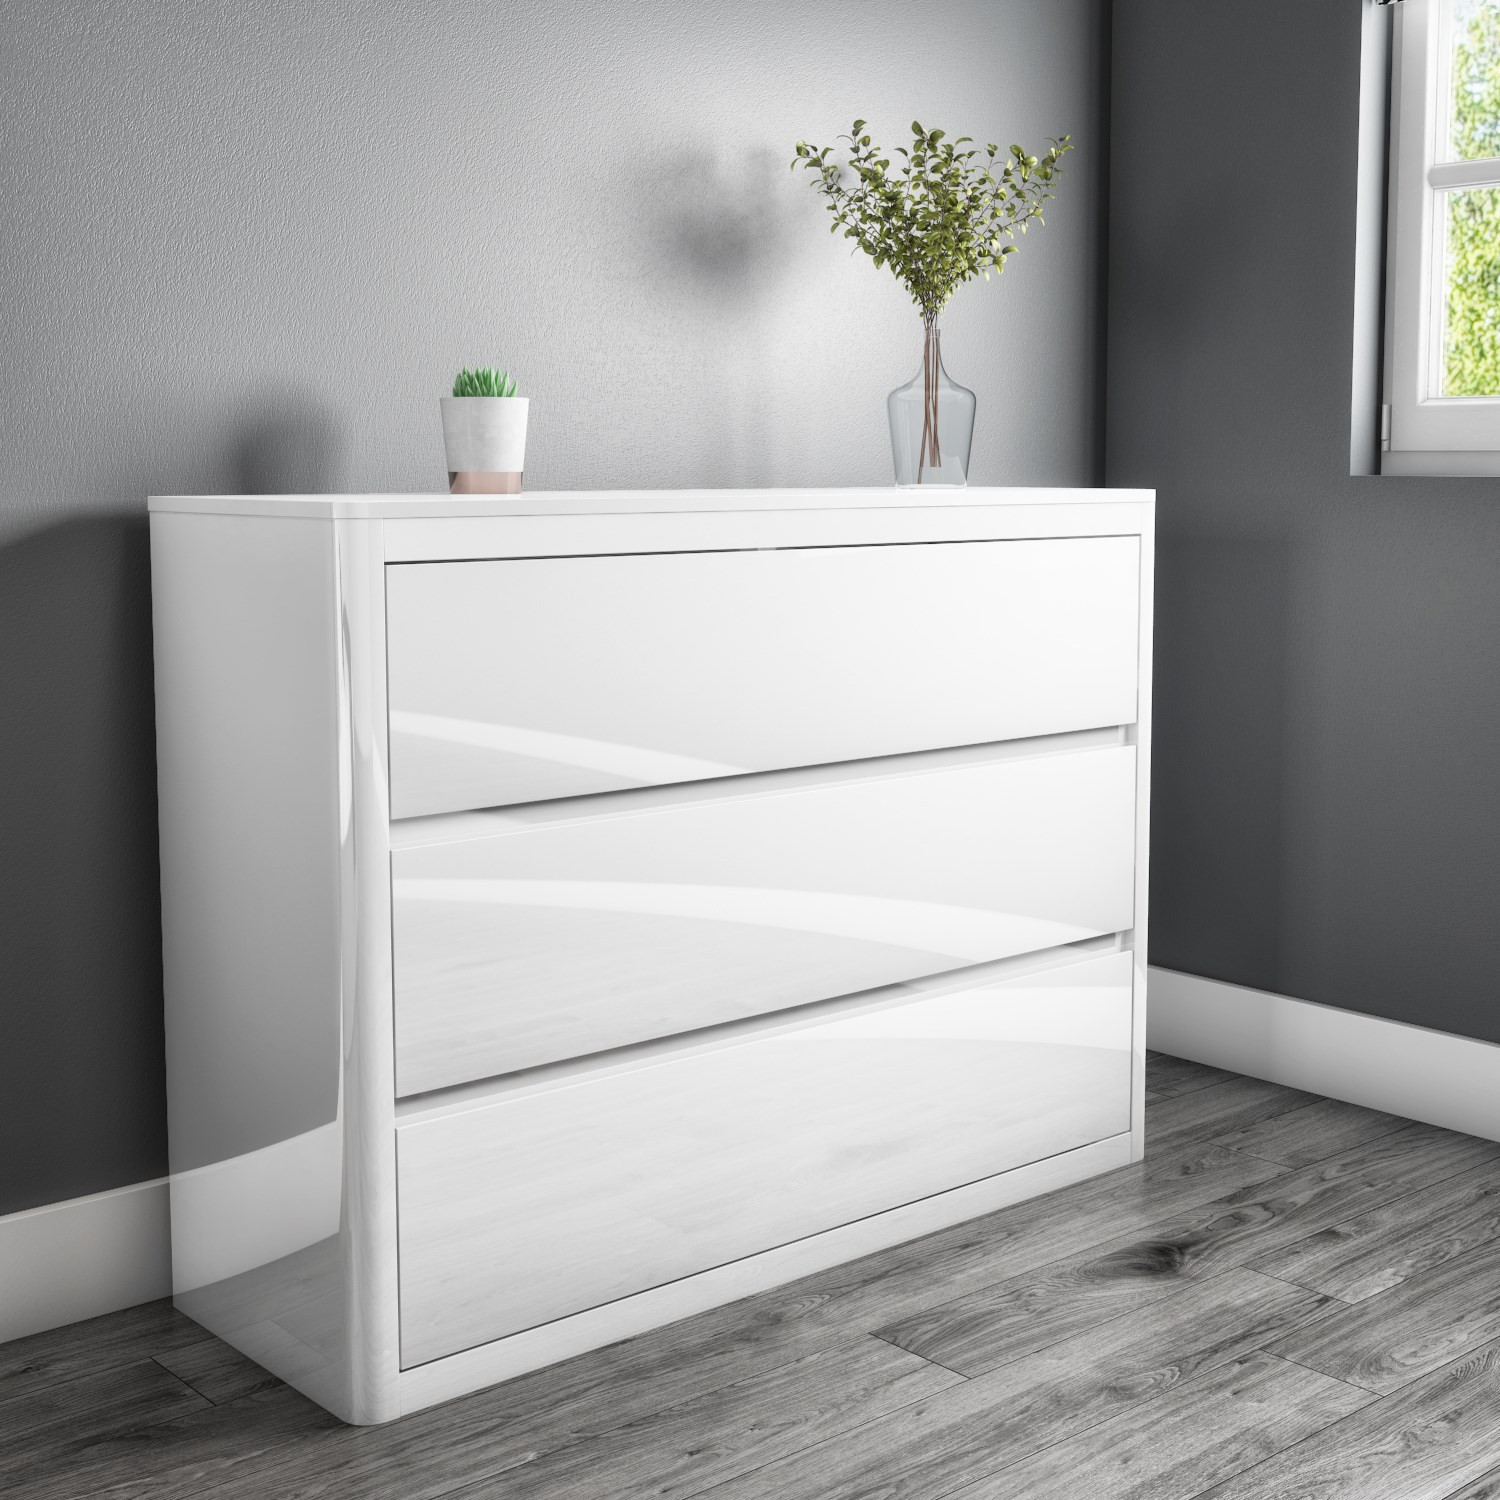 White Bedroom Cabinet
 White High Gloss Wide Chest of Drawers 3 Drawer Bedside